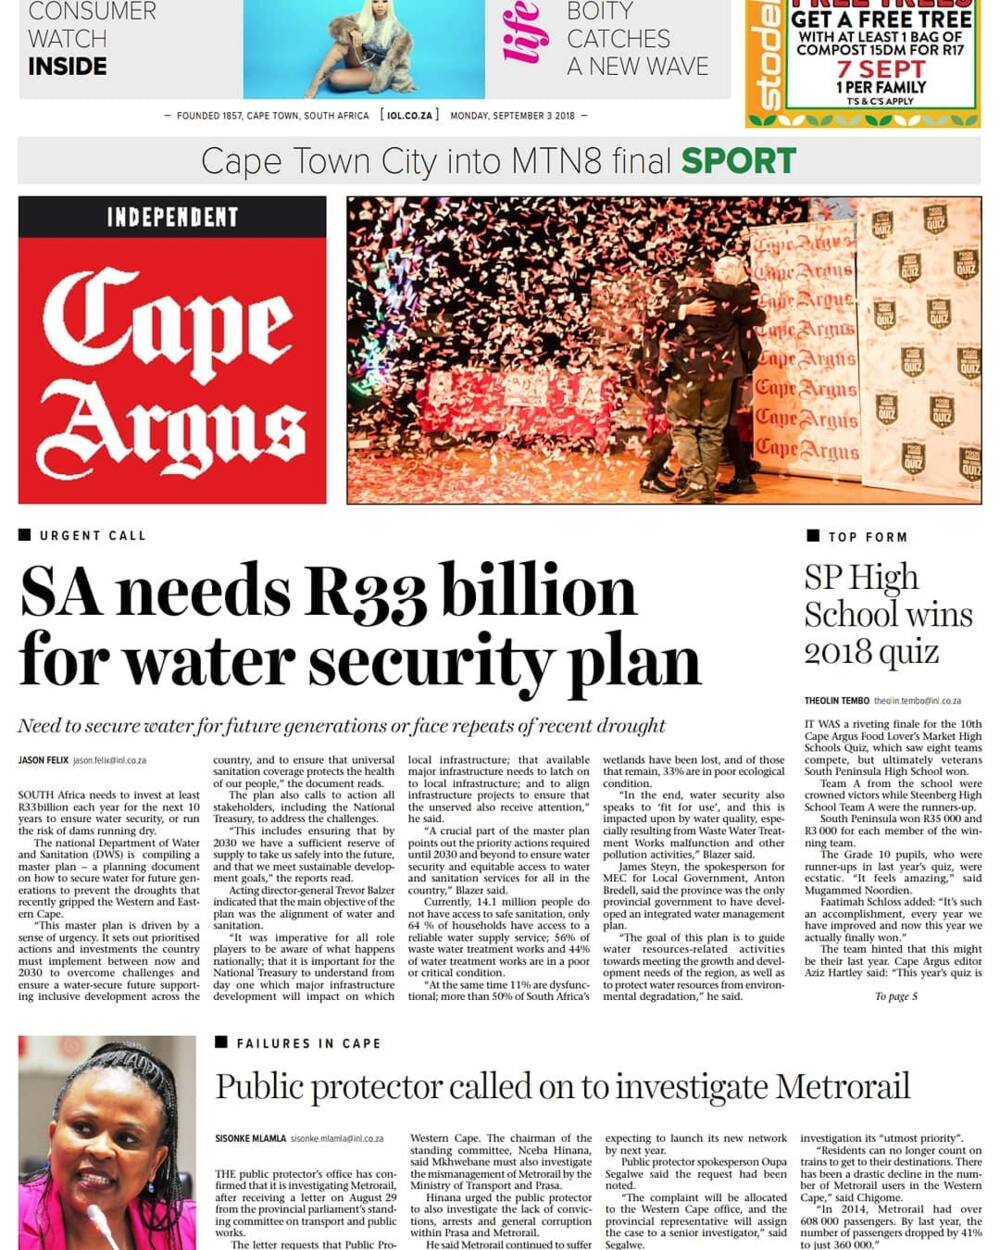 Complete guide to South African newspapers and their significance